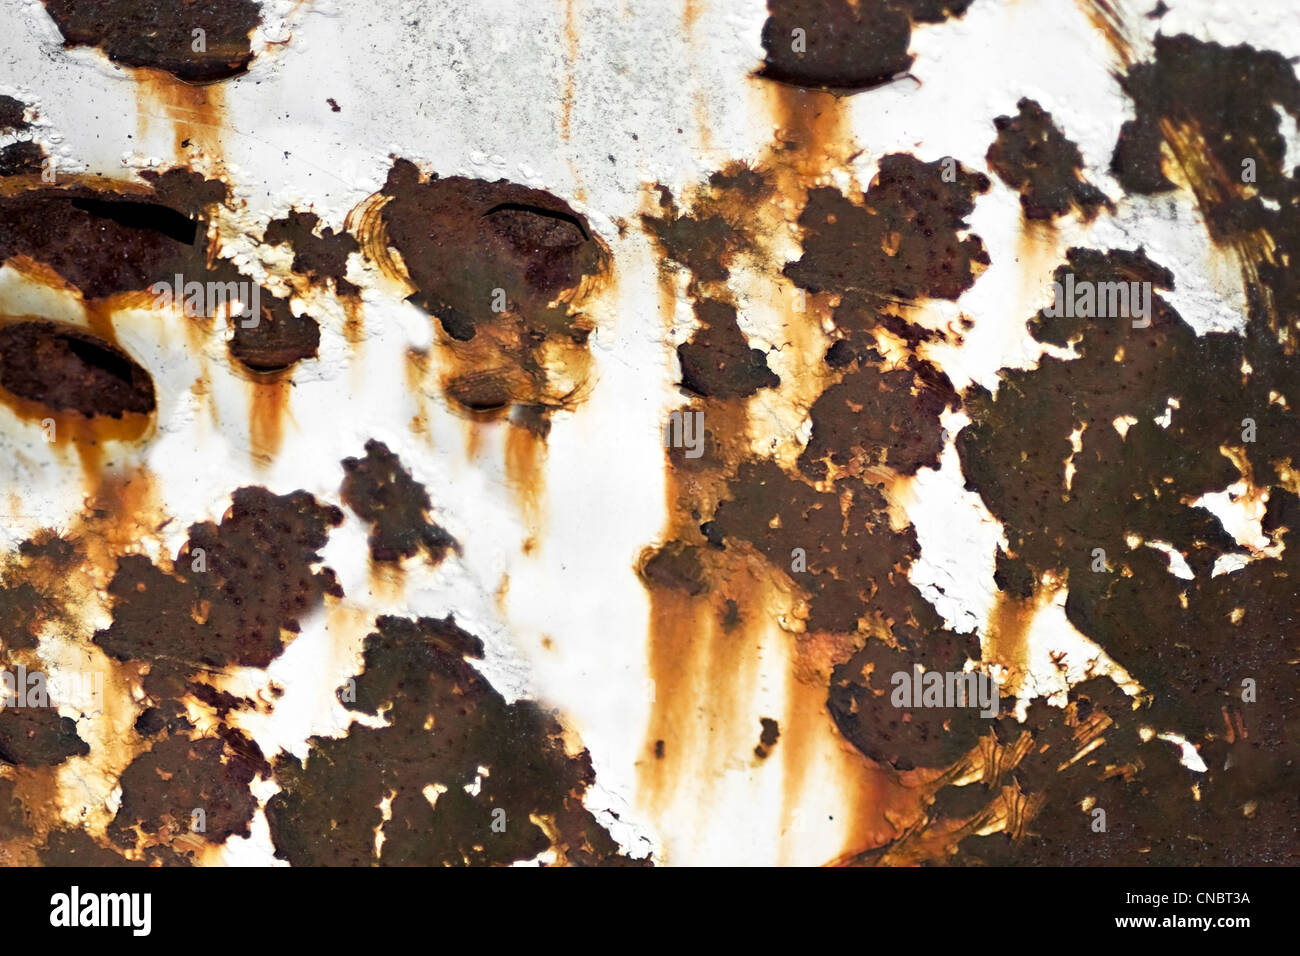 Closeup of rusted metal with chipped paint and holes. Stock Photo